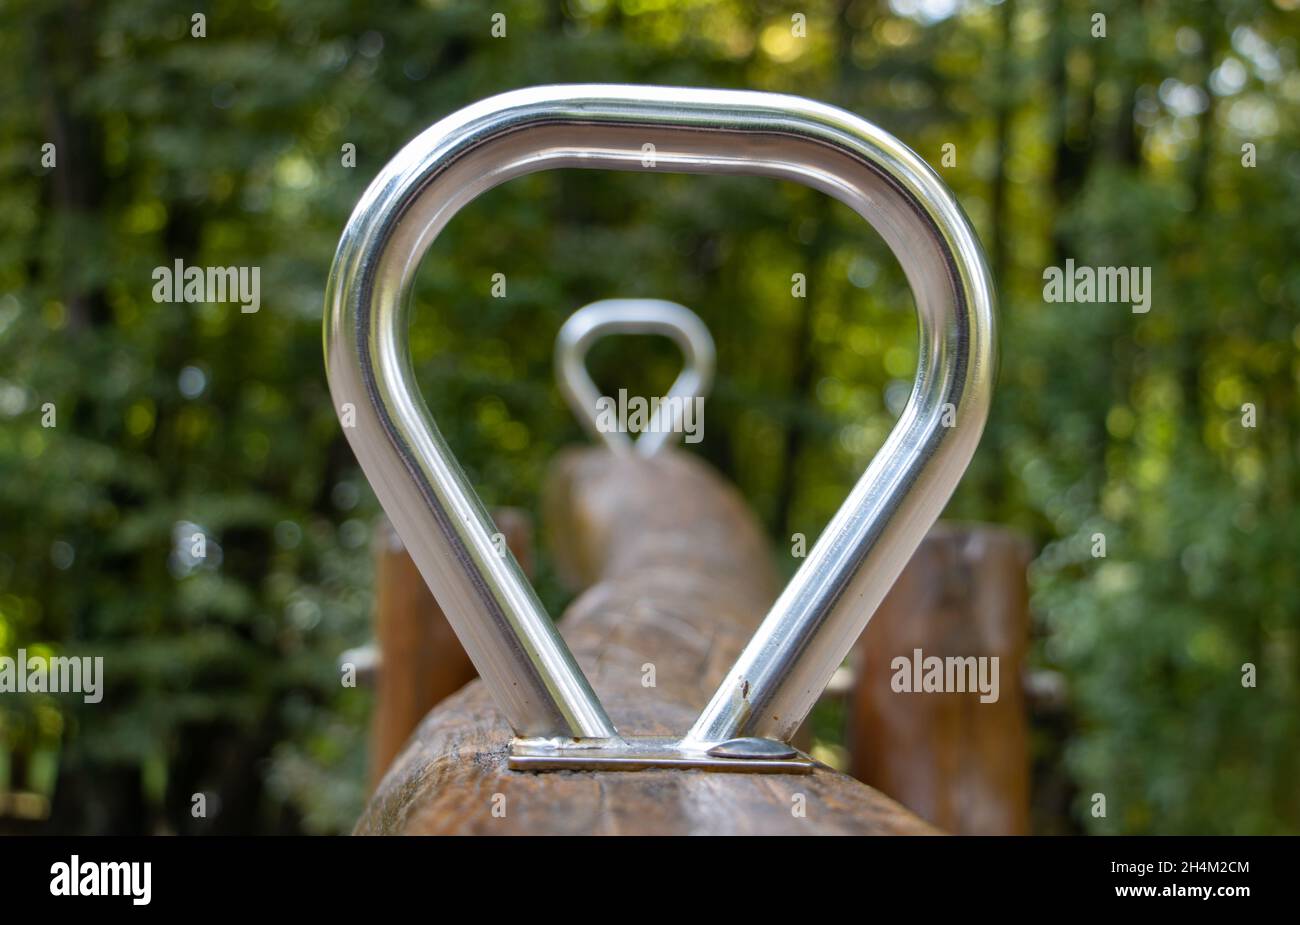 View through the handles of the swing, focused on the front handle Stock Photo